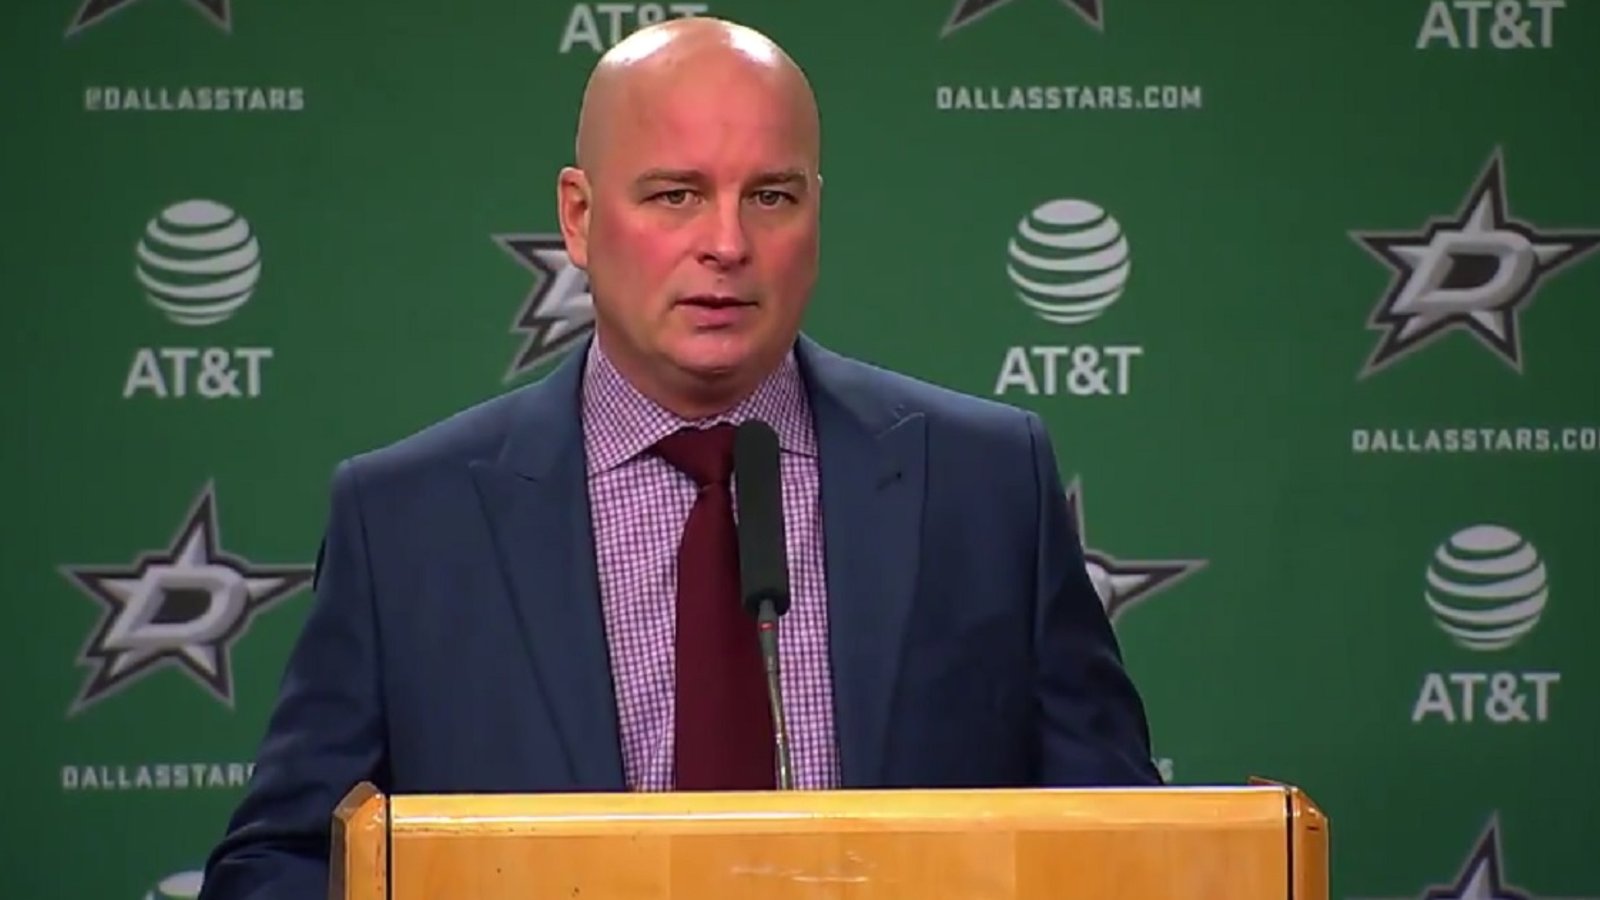 Stars head coach calls out his team in brutally honest press conference.